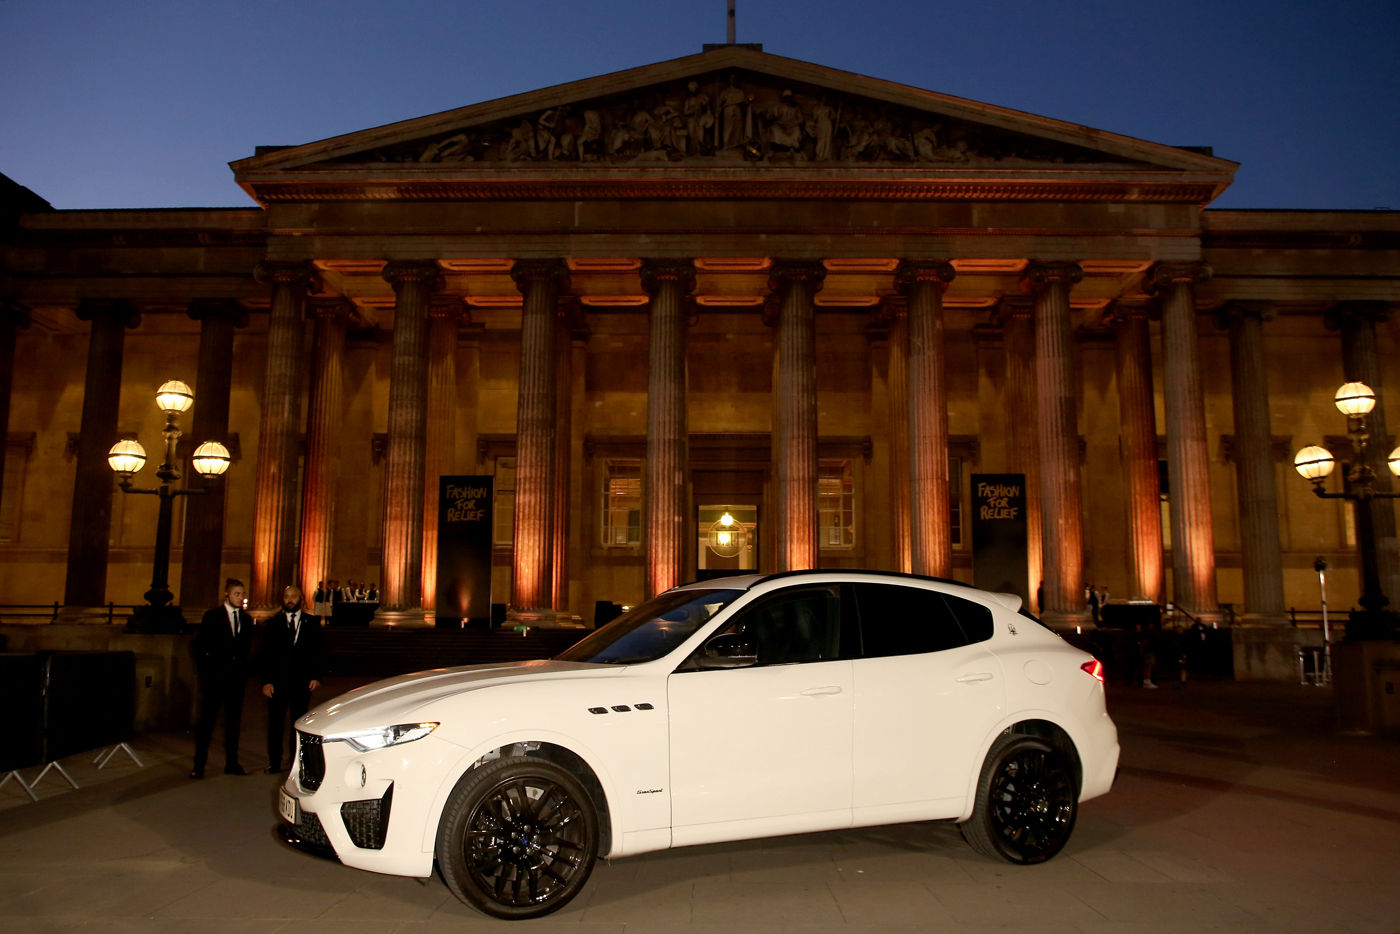 Maserati-Levante-chauffeur-s-VIPs-to-Fashion-For-Relief-at-The-British-Museum-on-September-14,-2019-in-London,-England